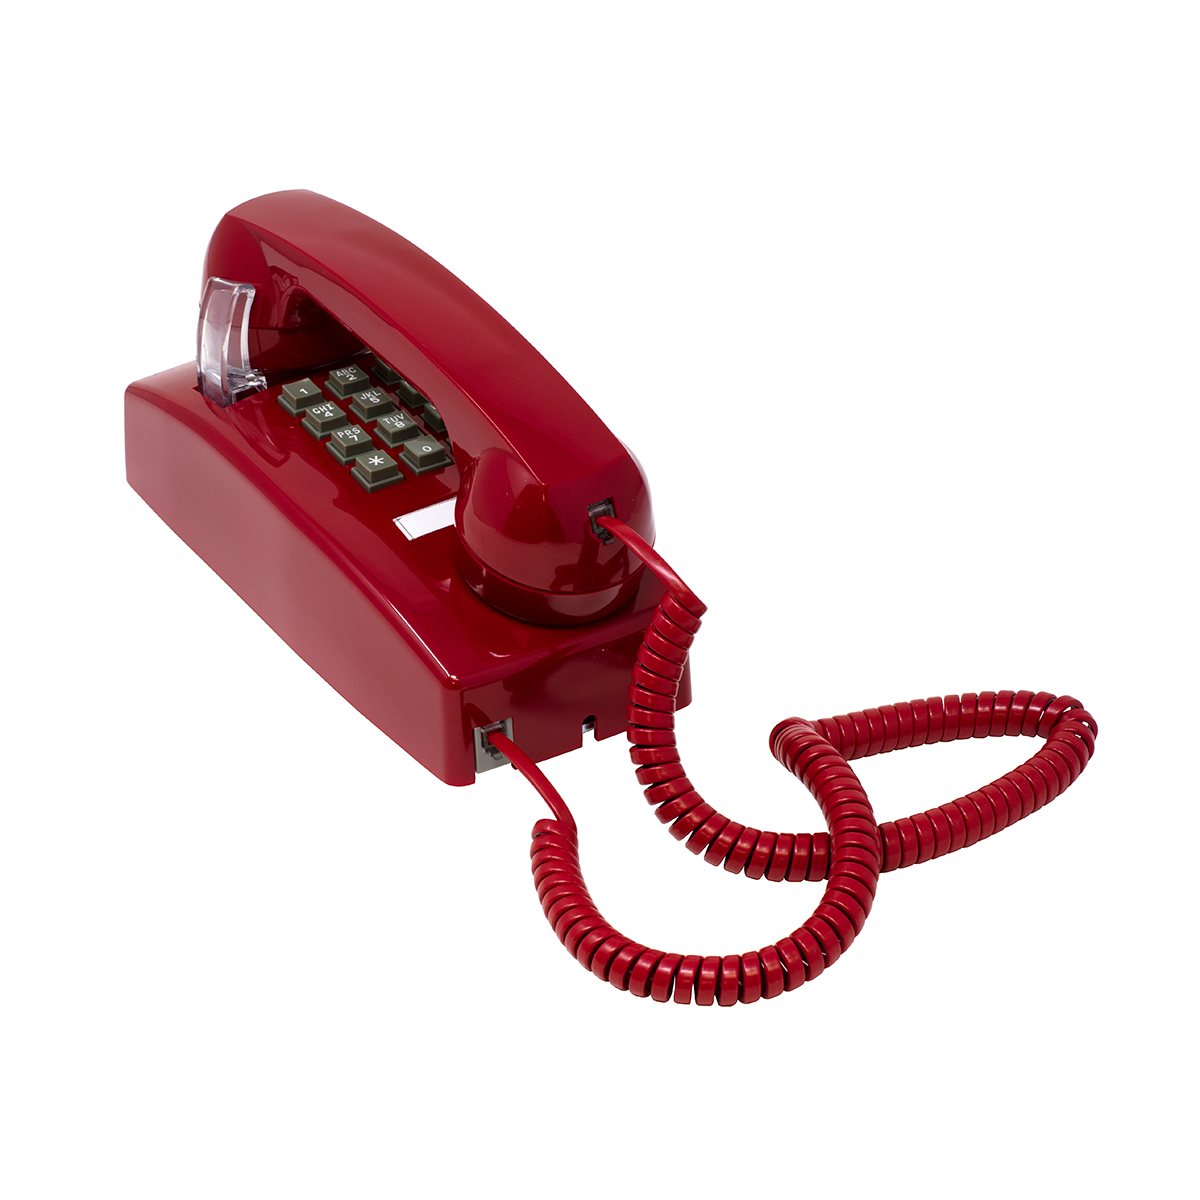 2554 Style Red Analog Wall Phone